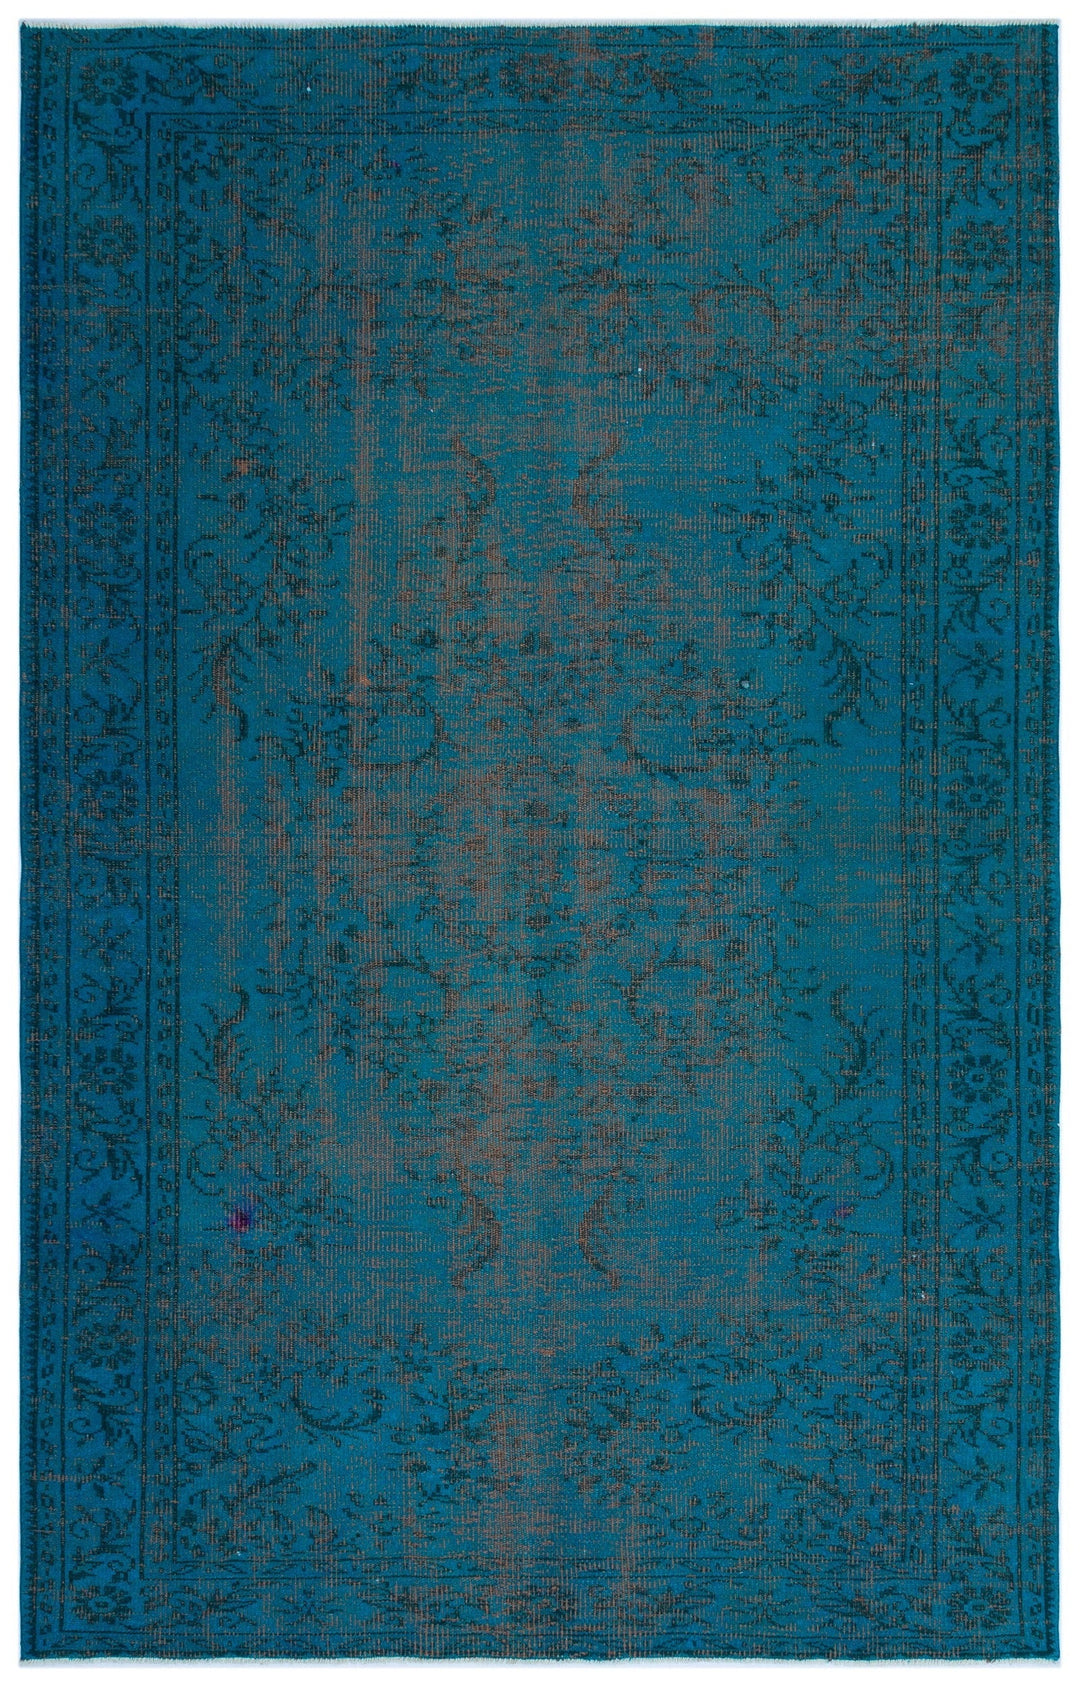 Athens Turquoise Tumbled Wool Hand Woven Carpet 166 x 260